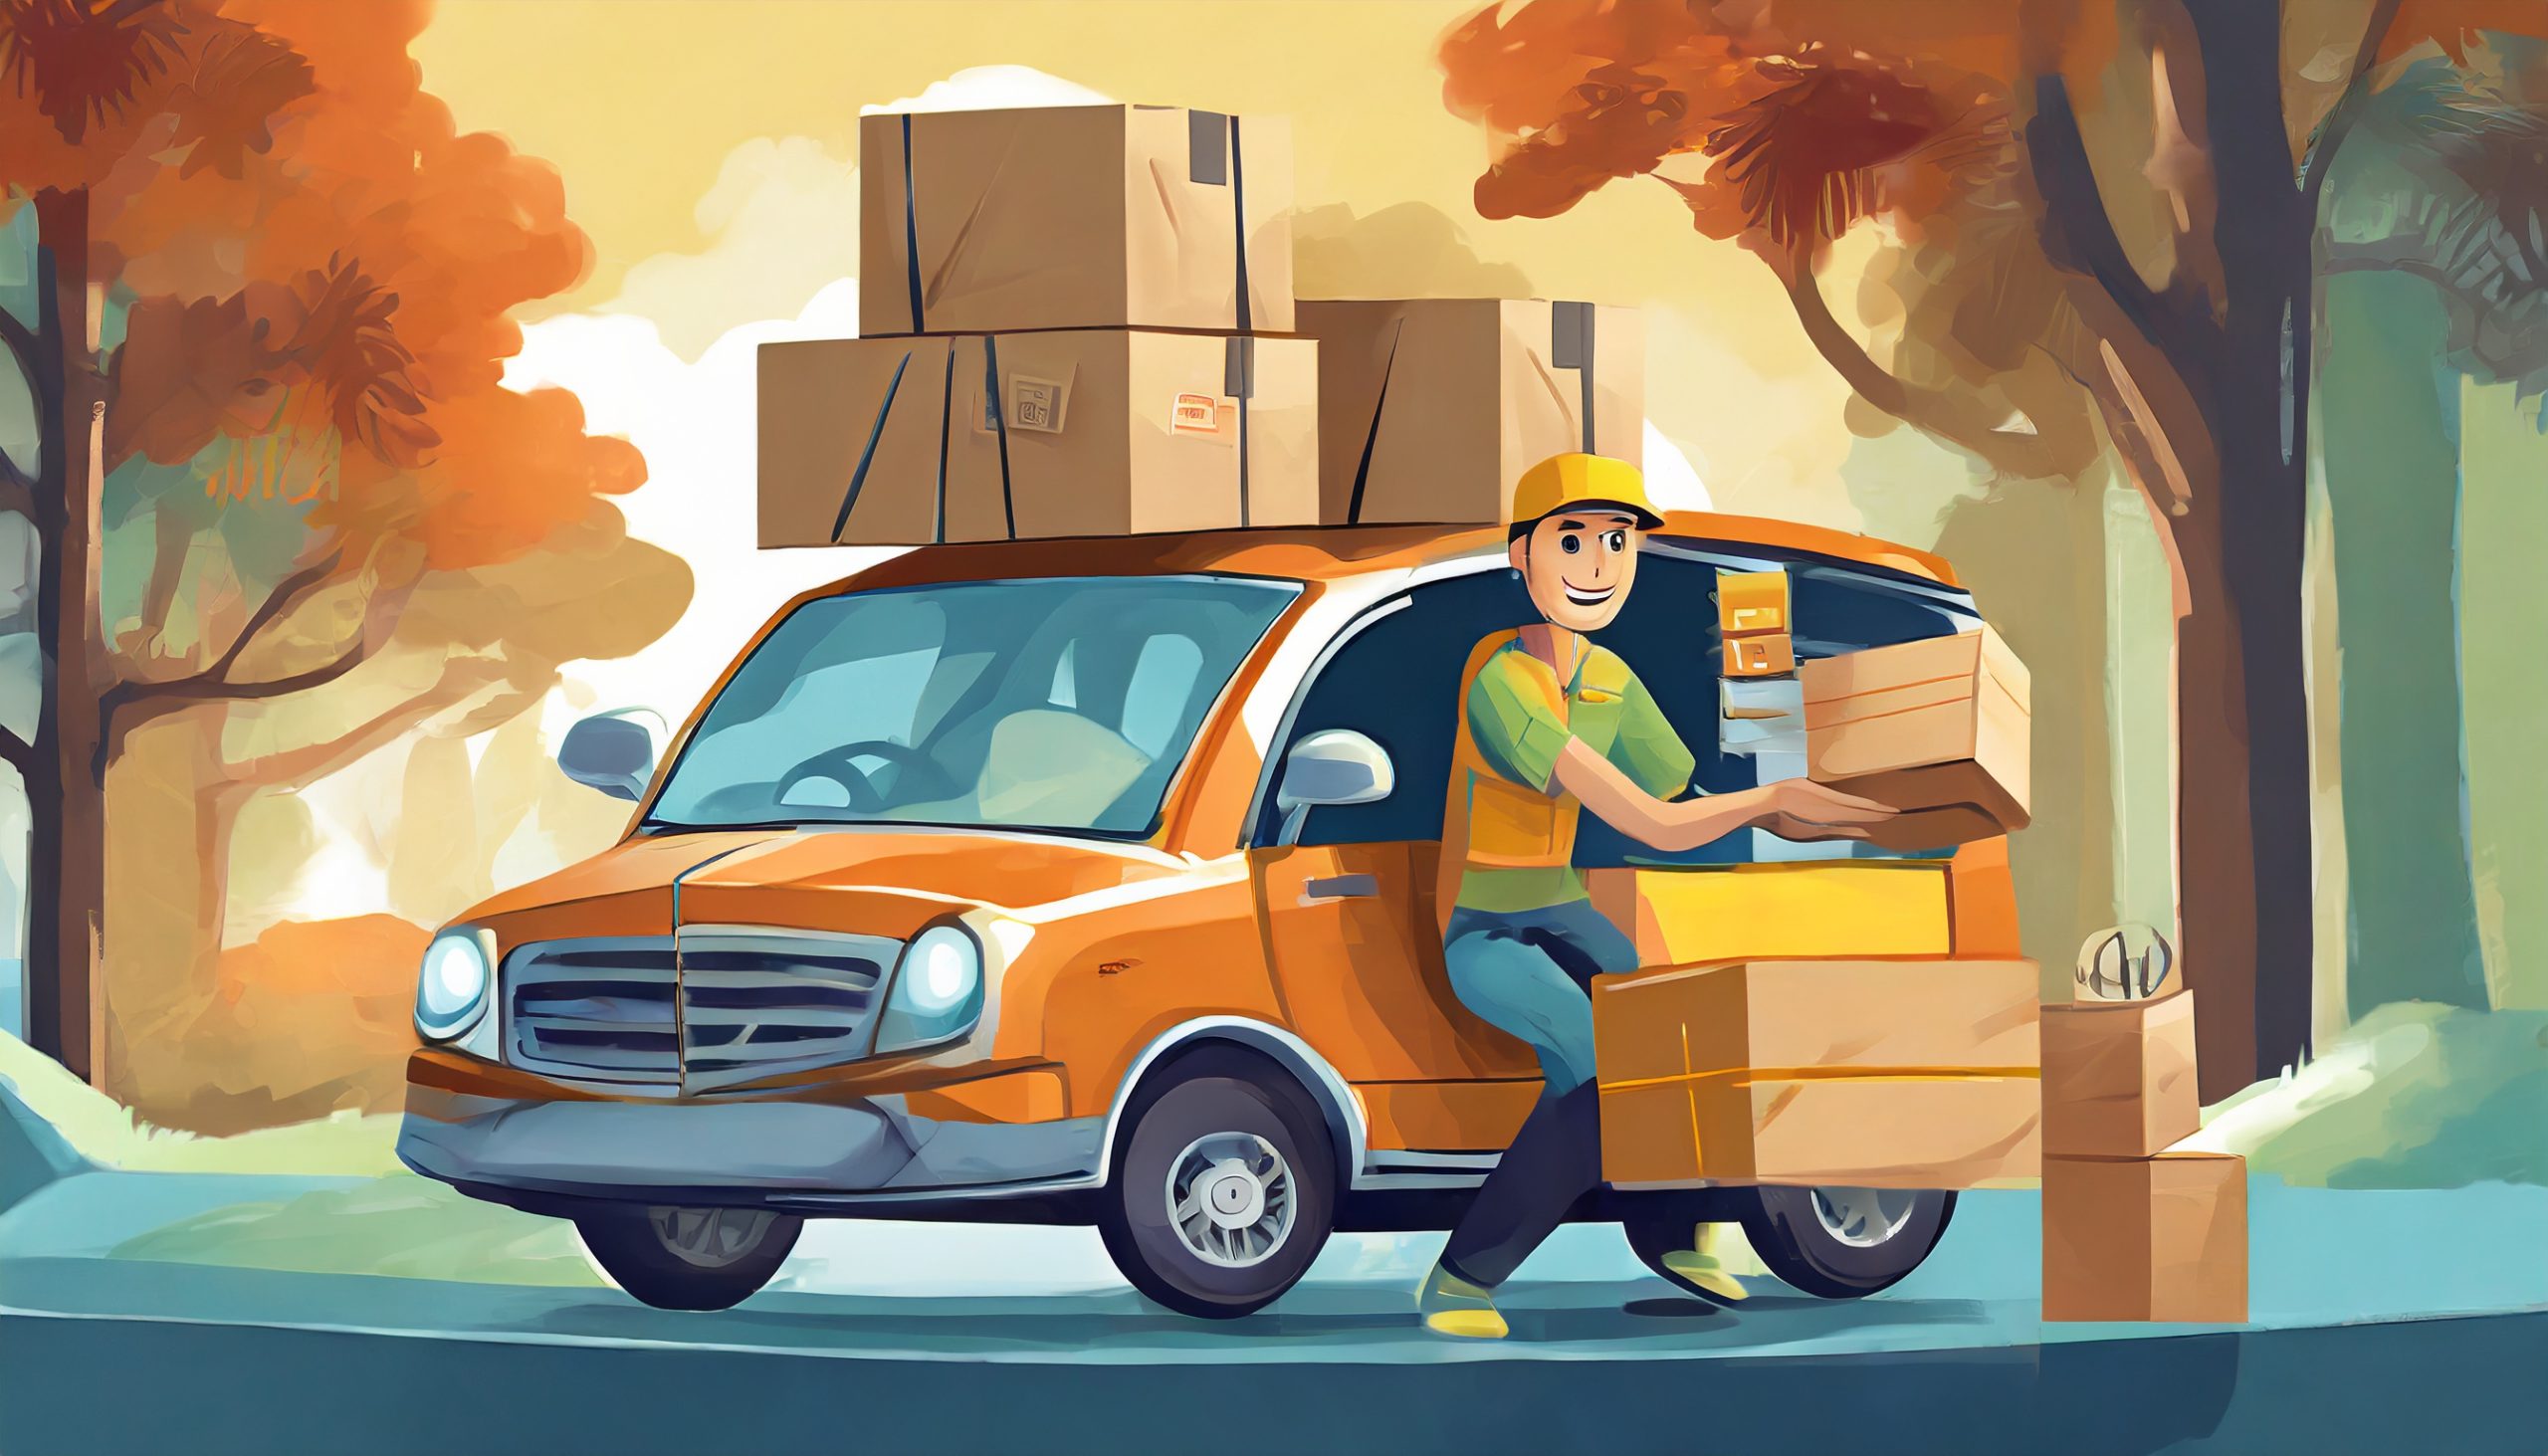 Illustration of a person delivering packages with their car